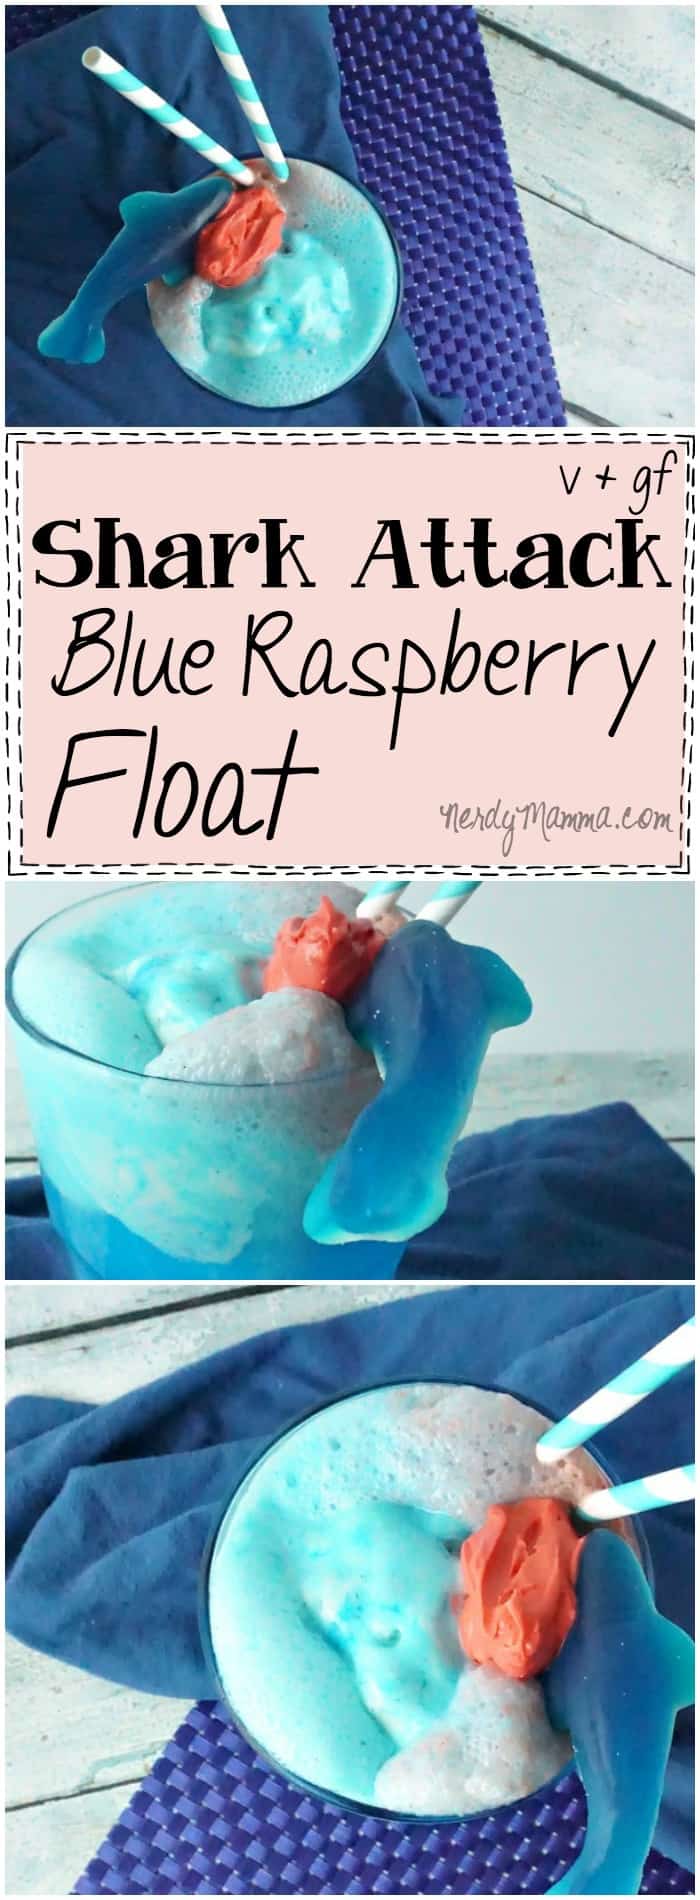 OMG! This is the funniest Shark Week idea...and so simple, too. I'd love a Blue Raspberry Float...but a Shark Attack Float--L-O-V-E!